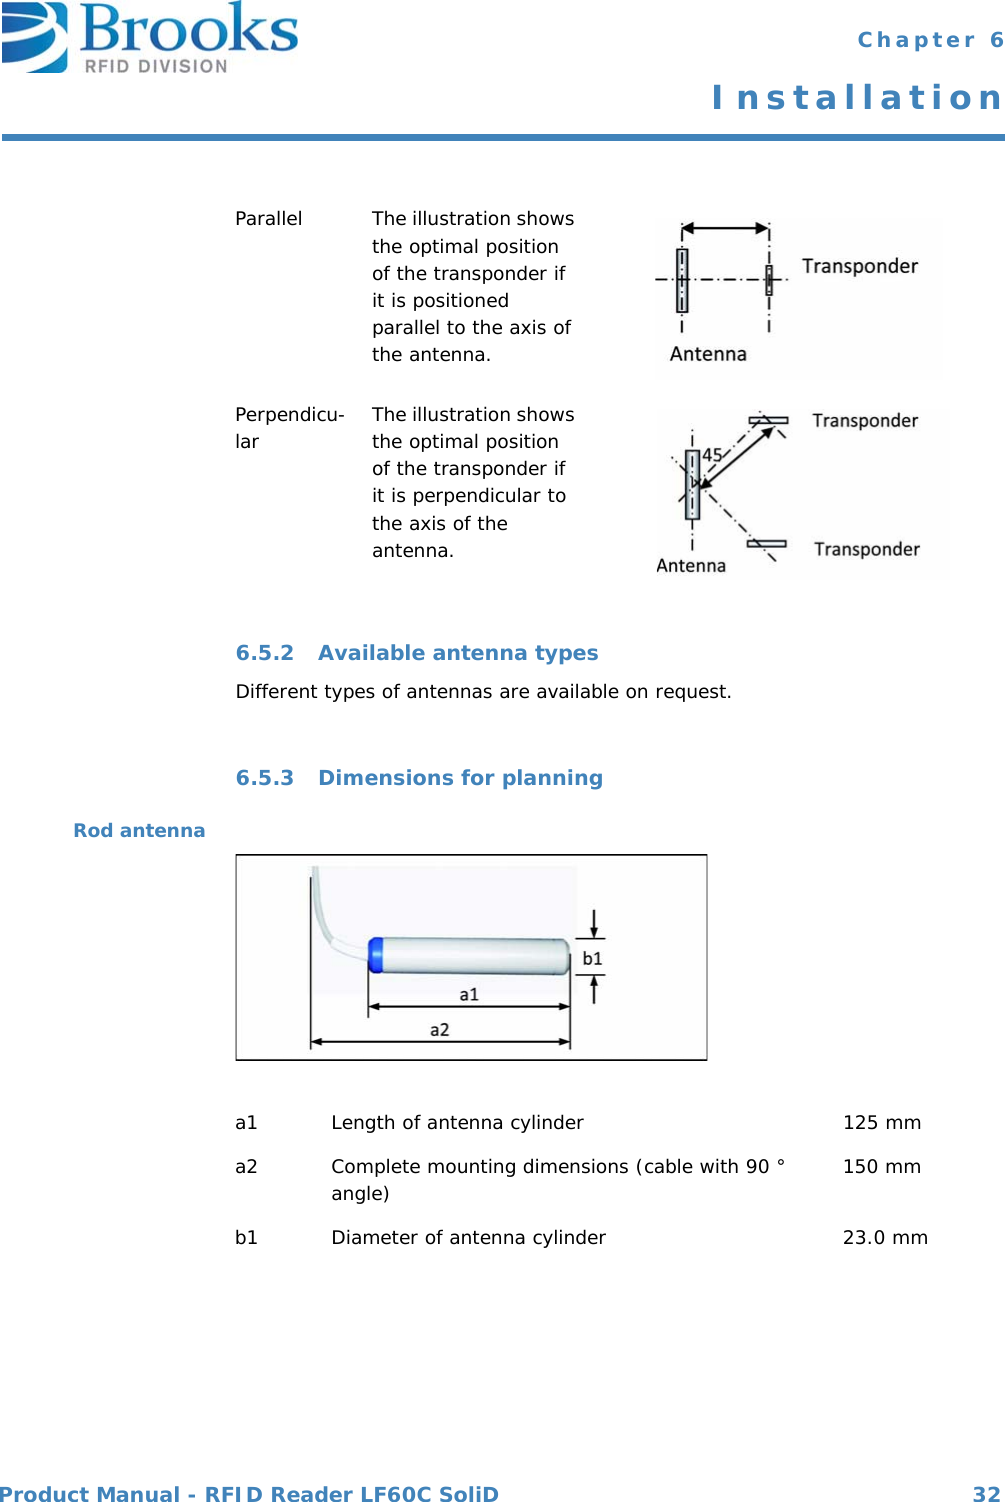 Product Manual - RFID Reader LF60C SoliD 32 Chapter 6Installation6.5.2 Available antenna typesDifferent types of antennas are available on request.6.5.3 Dimensions for planningRod antennaParallel The illustration shows the optimal position of the transponder if it is positioned parallel to the axis of the antenna.Perpendicu-lar The illustration shows the optimal position of the transponder if it is perpendicular to the axis of the antenna.a1 Length of antenna cylinder 125 mma2 Complete mounting dimensions (cable with 90 ° angle) 150 mmb1 Diameter of antenna cylinder 23.0 mm